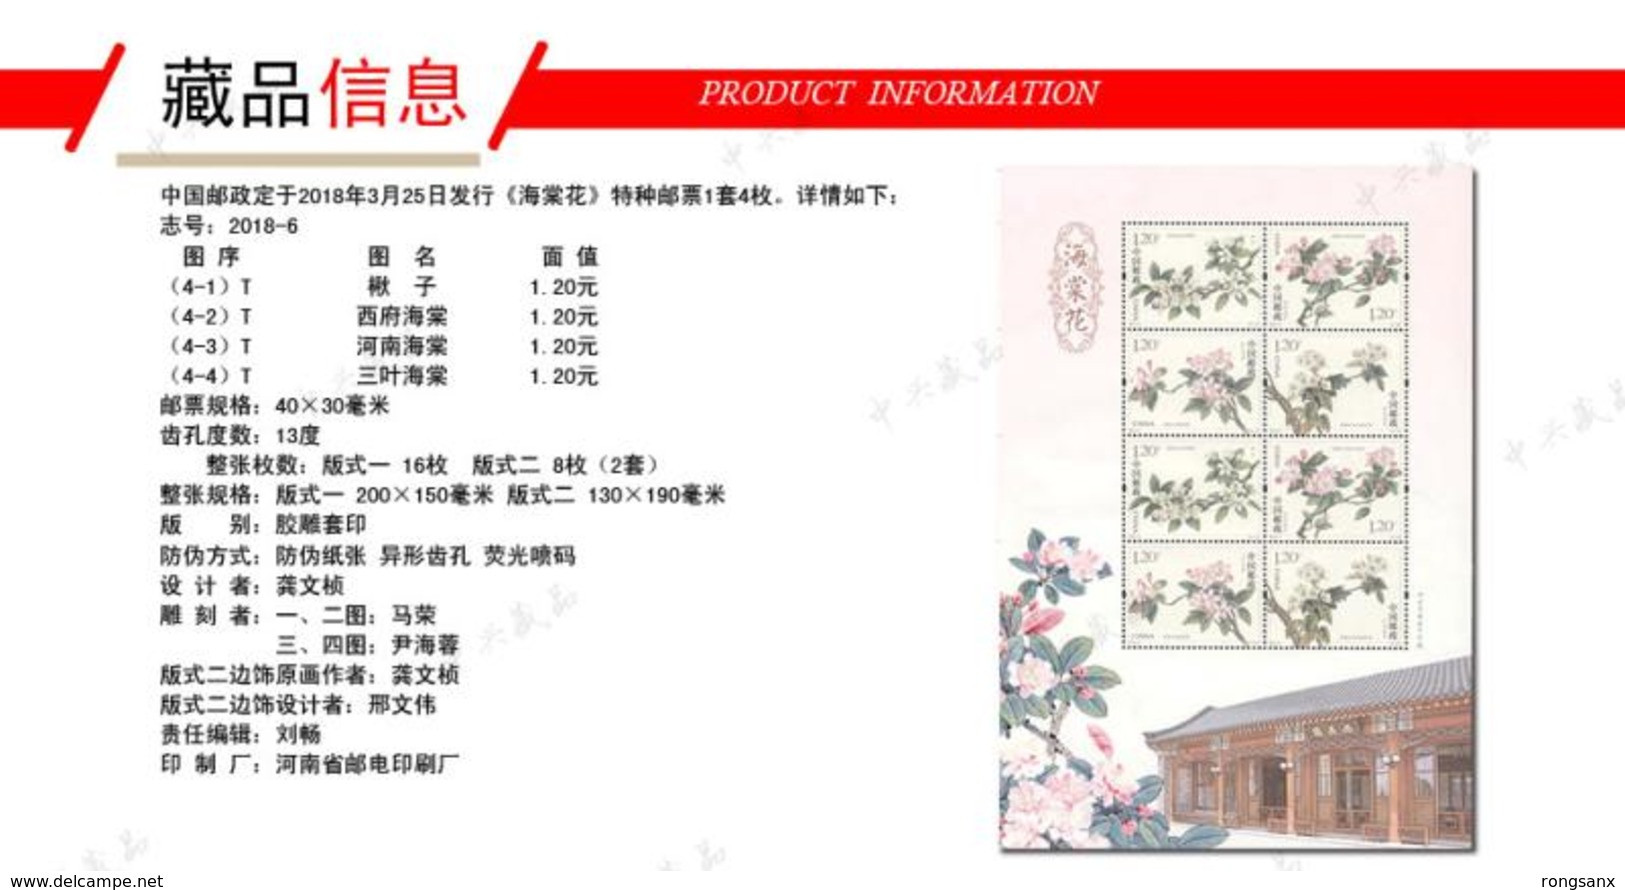 China 2018 SHEETLET YEAR PACK INCLUDE 15 SHEETLETS SEE PIC INCLUDE ALBUM